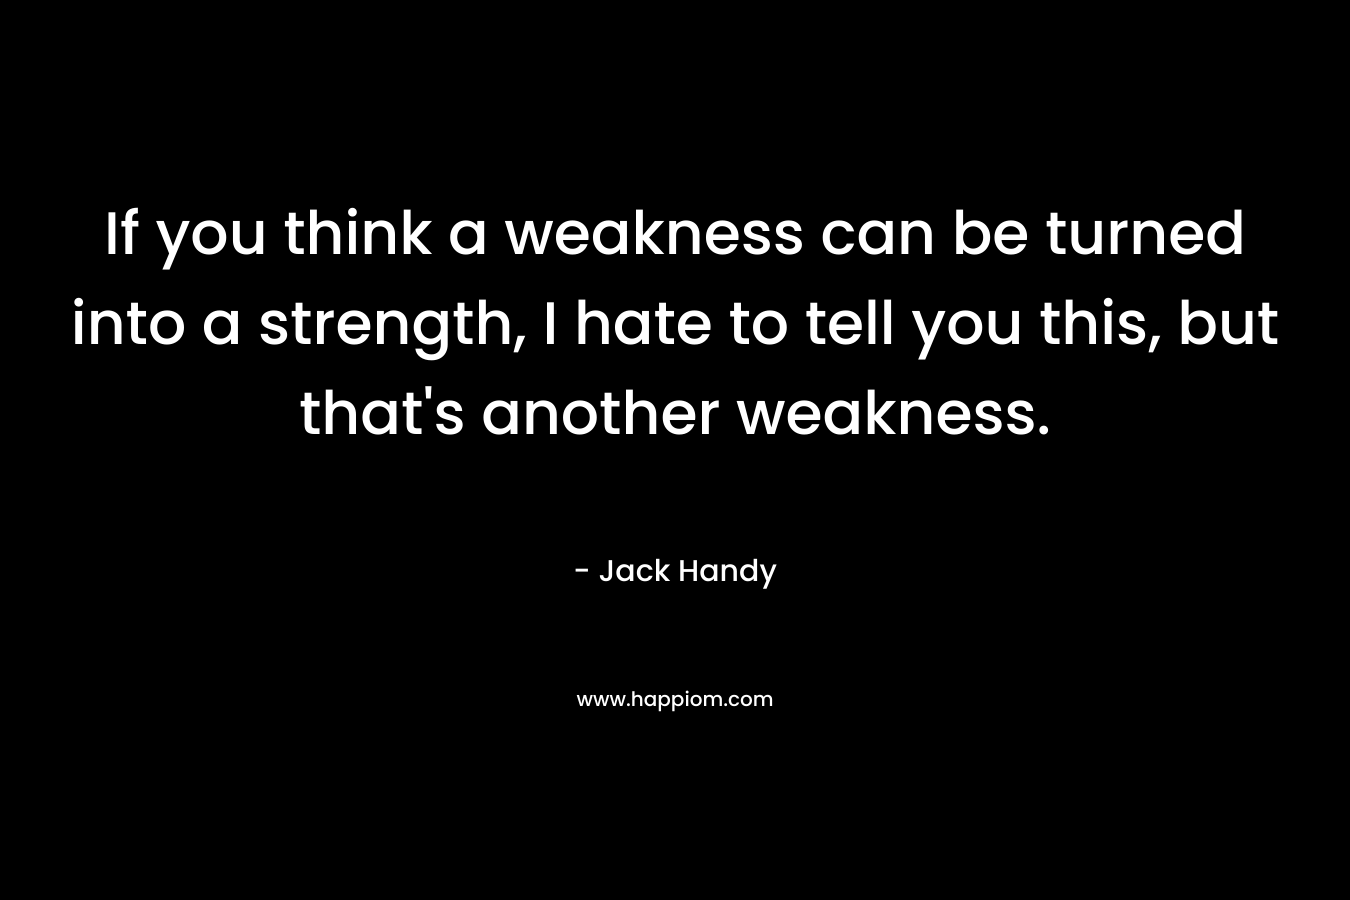 If you think a weakness can be turned into a strength, I hate to tell you this, but that's another weakness.